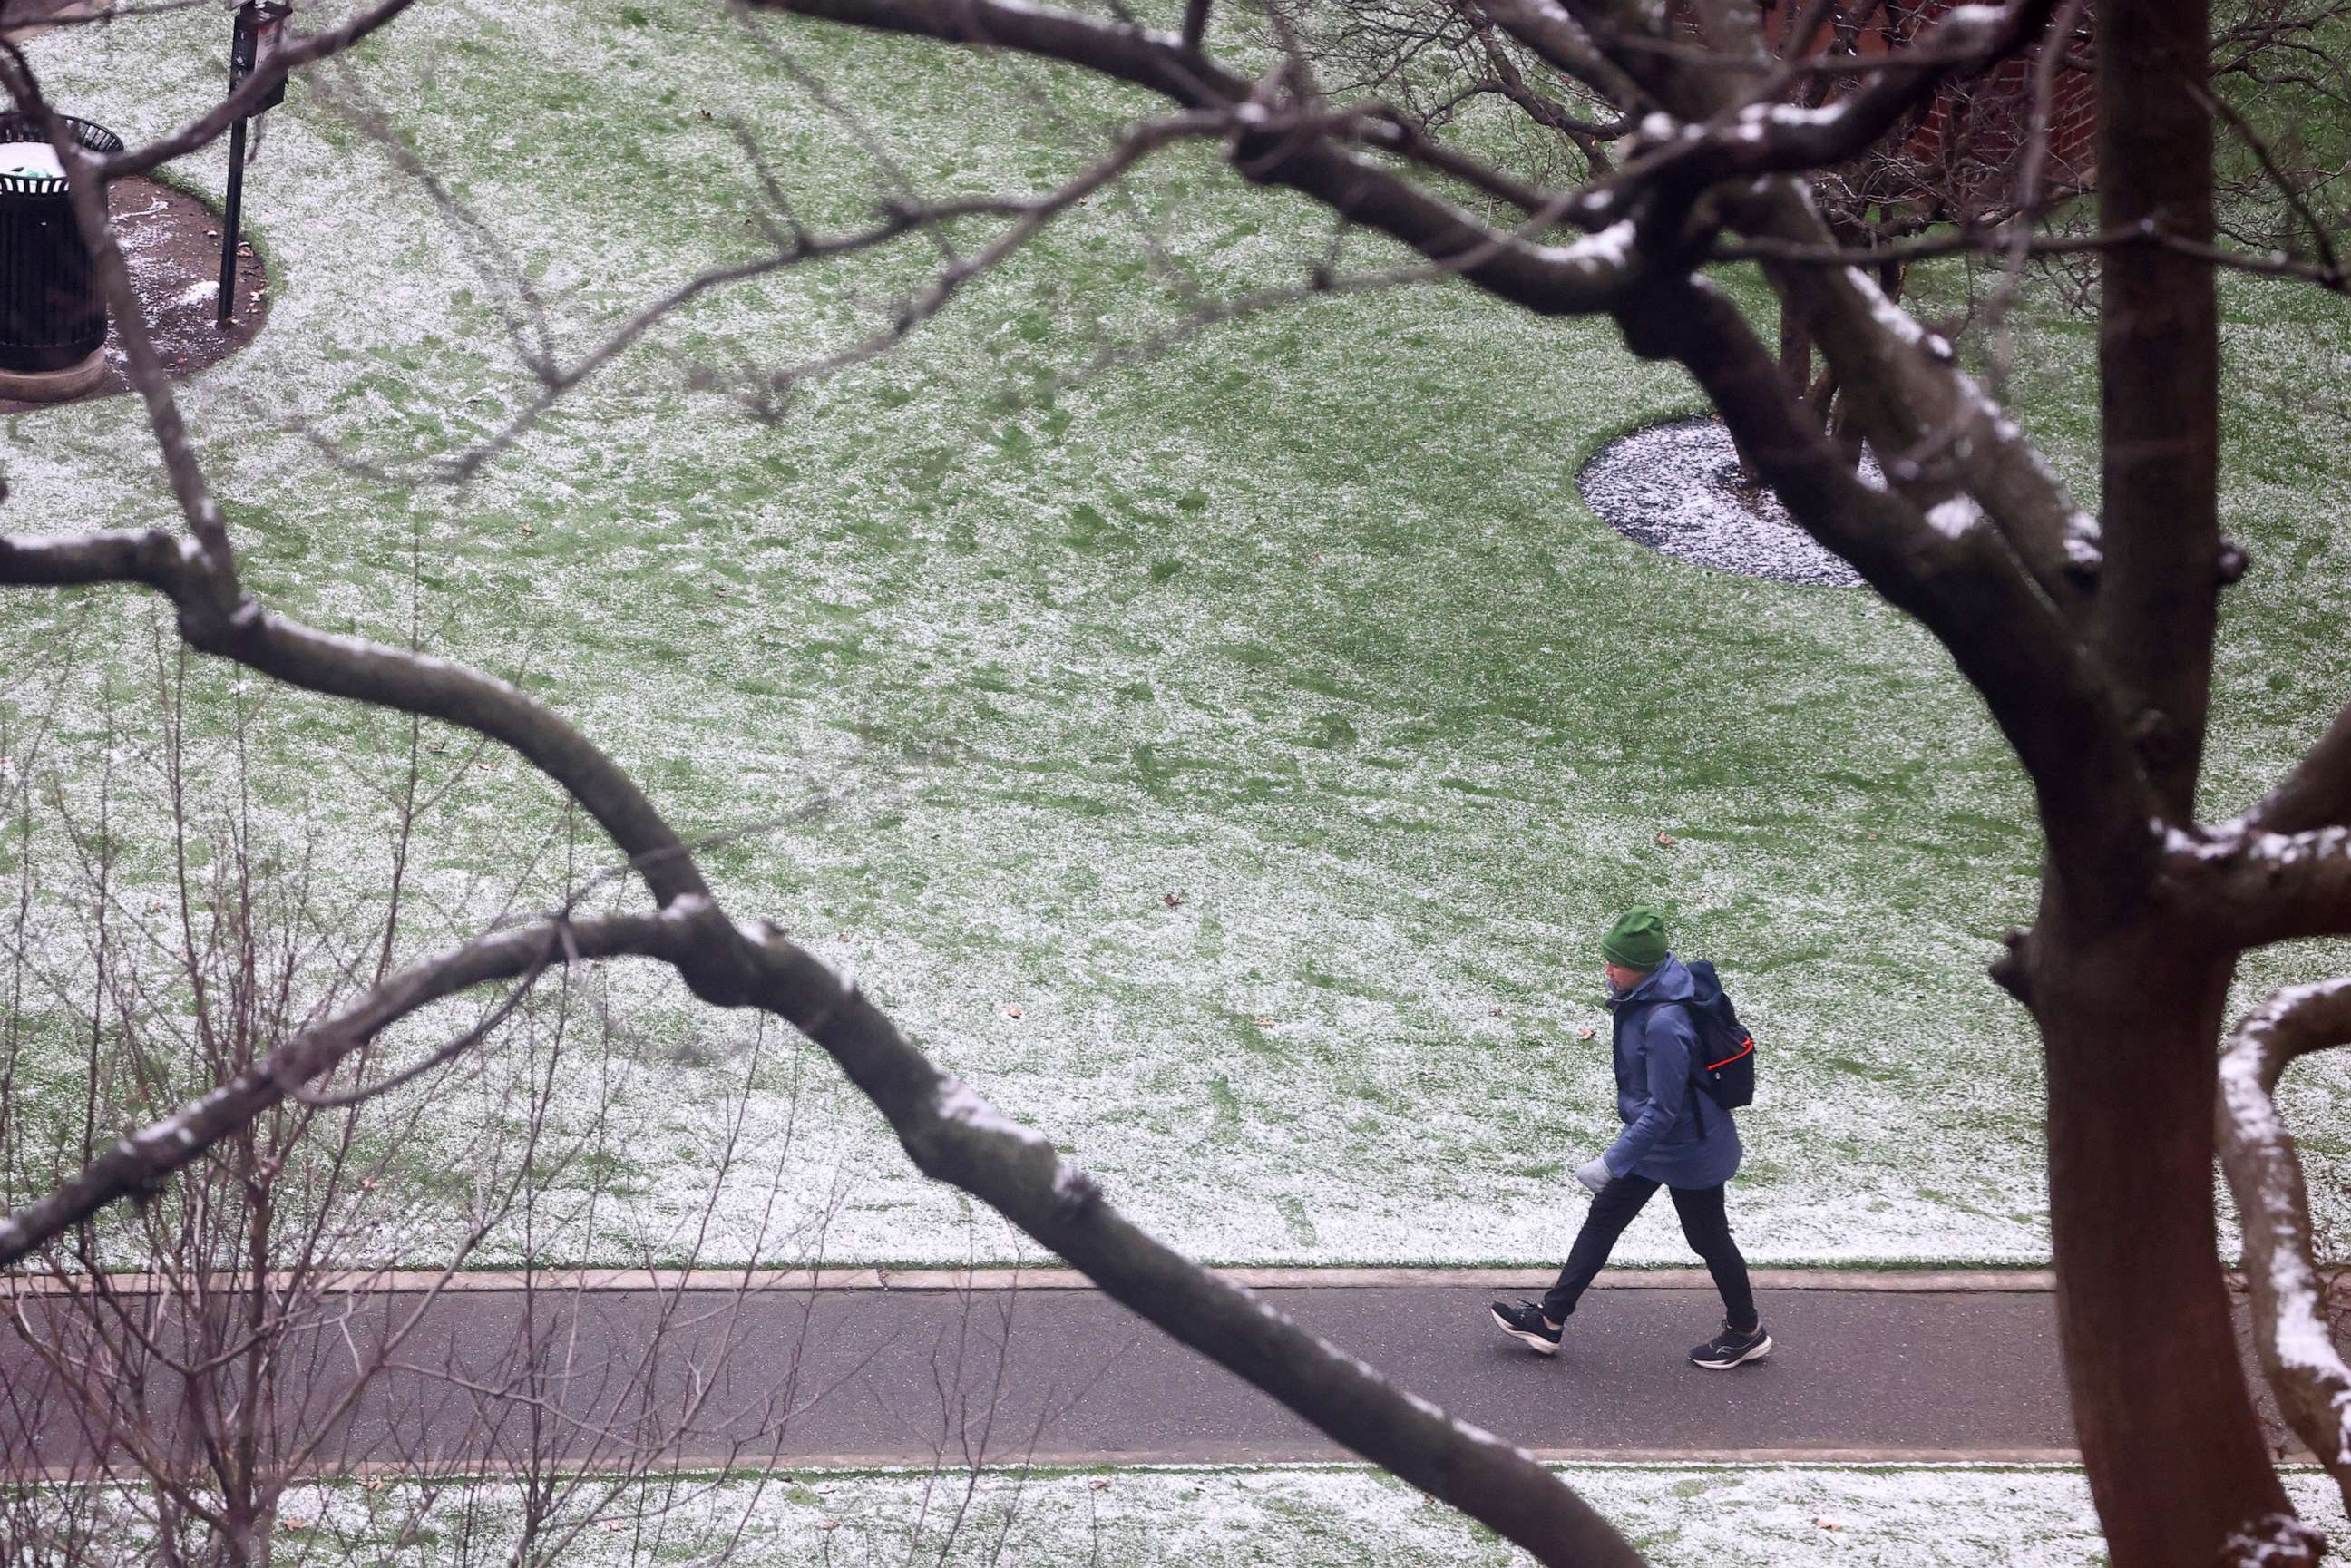 PHOTO: A person walks through a park following the first measurable snowfall of the season, breaking a 50 year record, in New York City, Feb. 01, 2023.